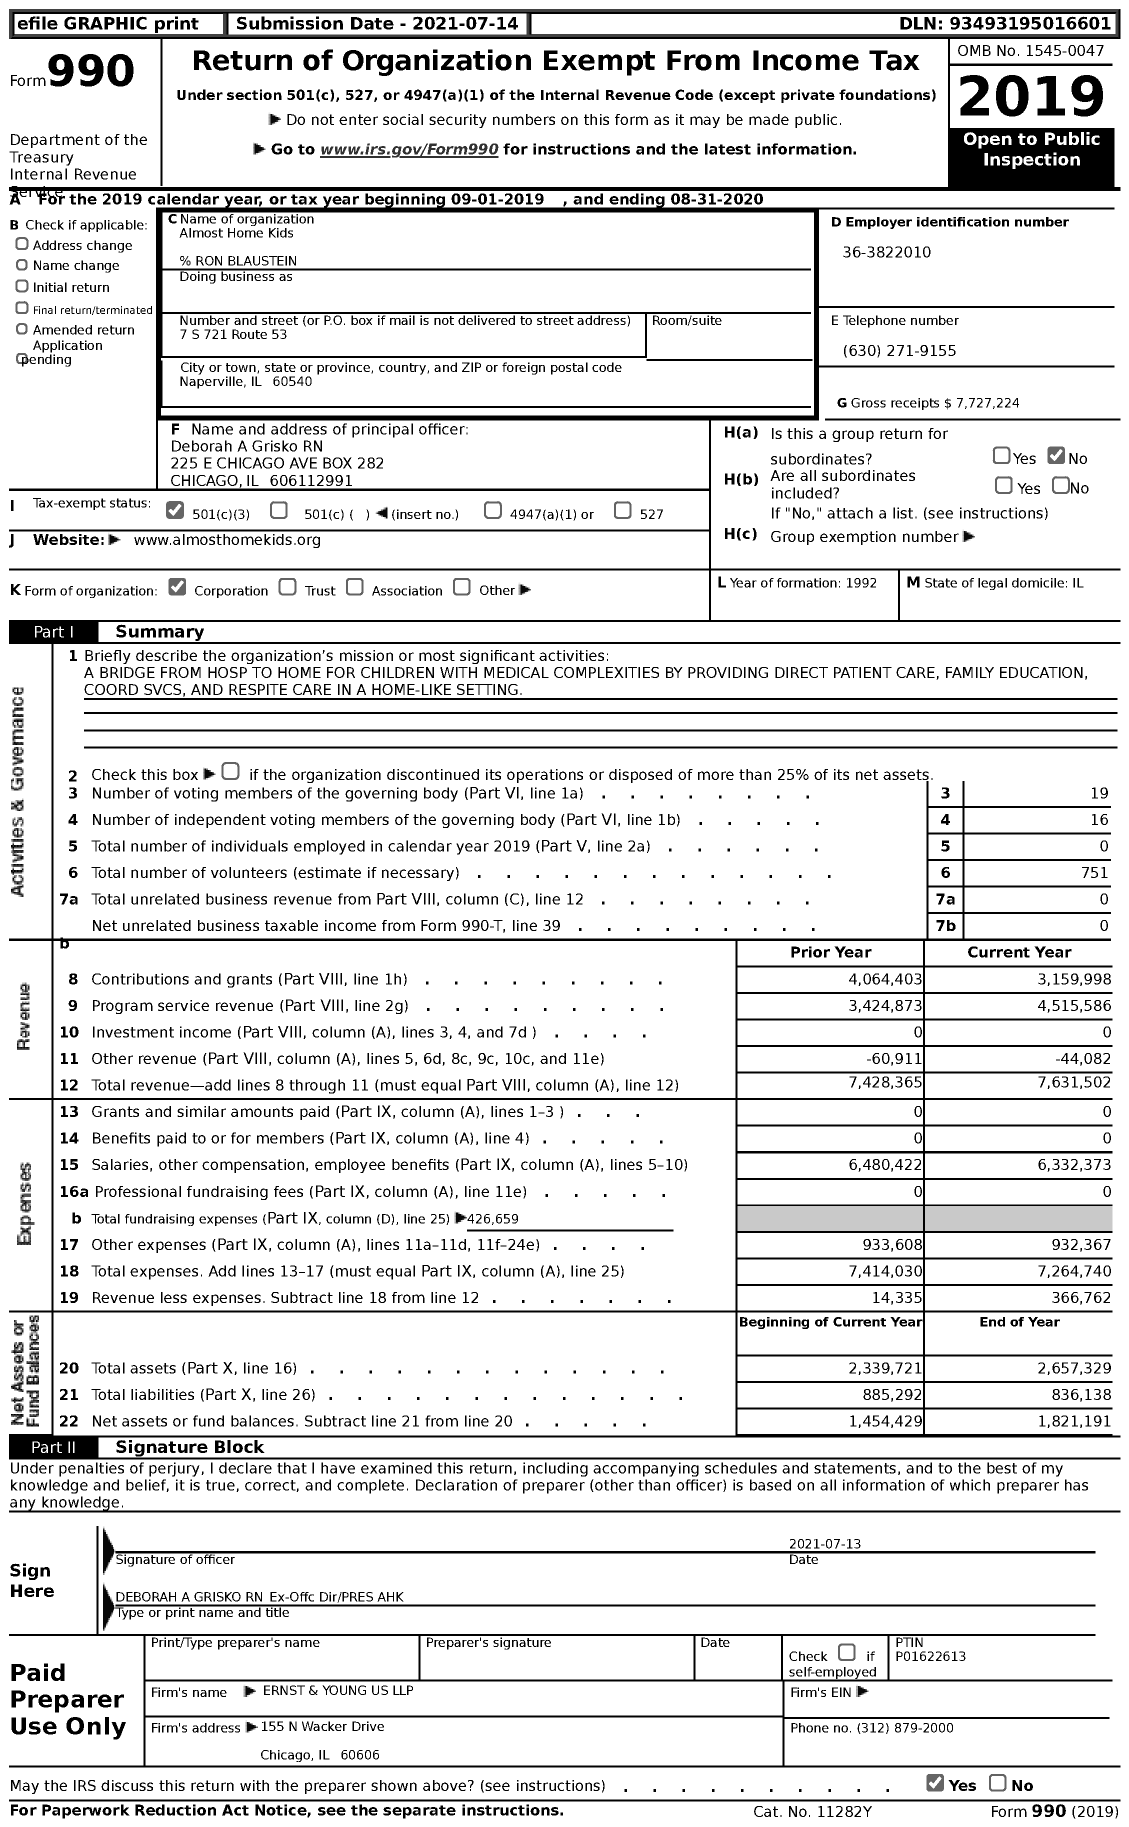 Image of first page of 2019 Form 990 for Almost Home Kids (AHK)